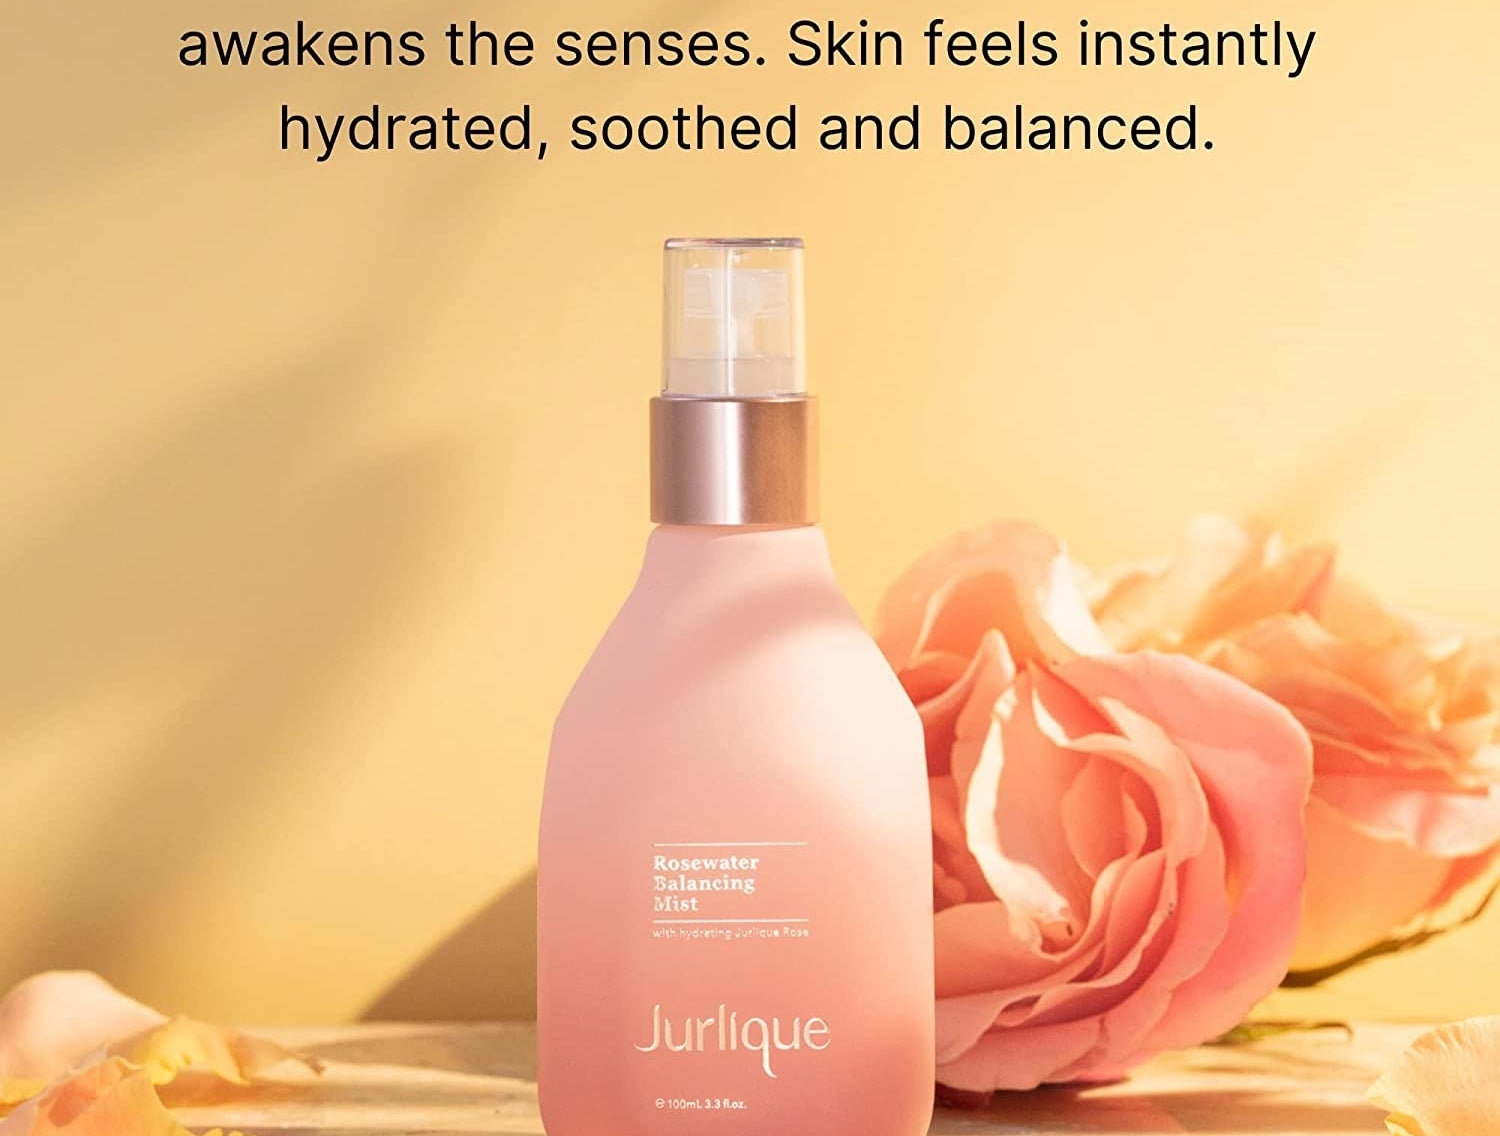 A pink bottle of skincare with pink roses